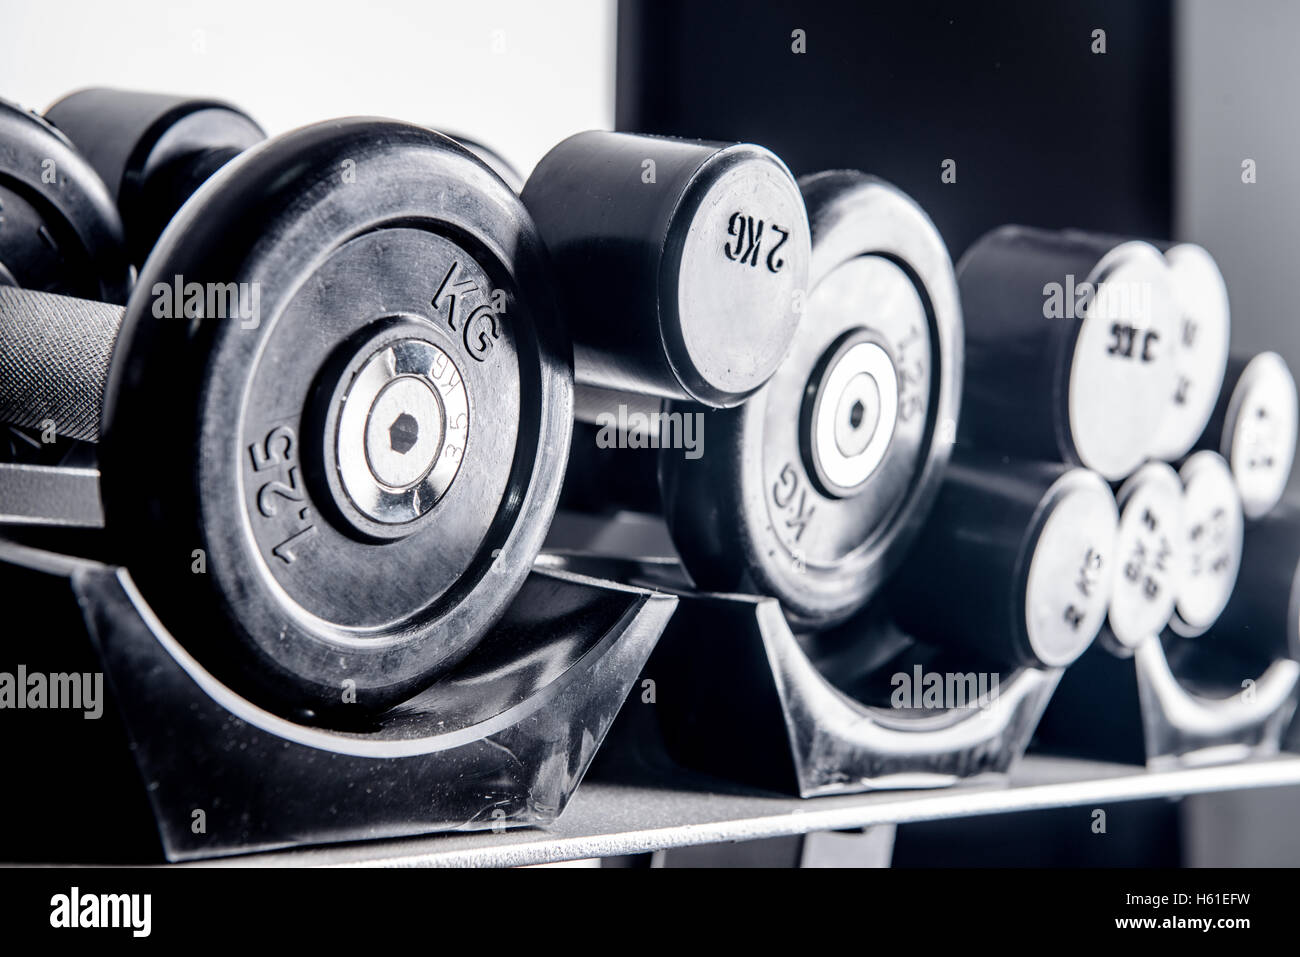 Sports dumbbells in modern sports club. Weight Training Equipment Stock Photo